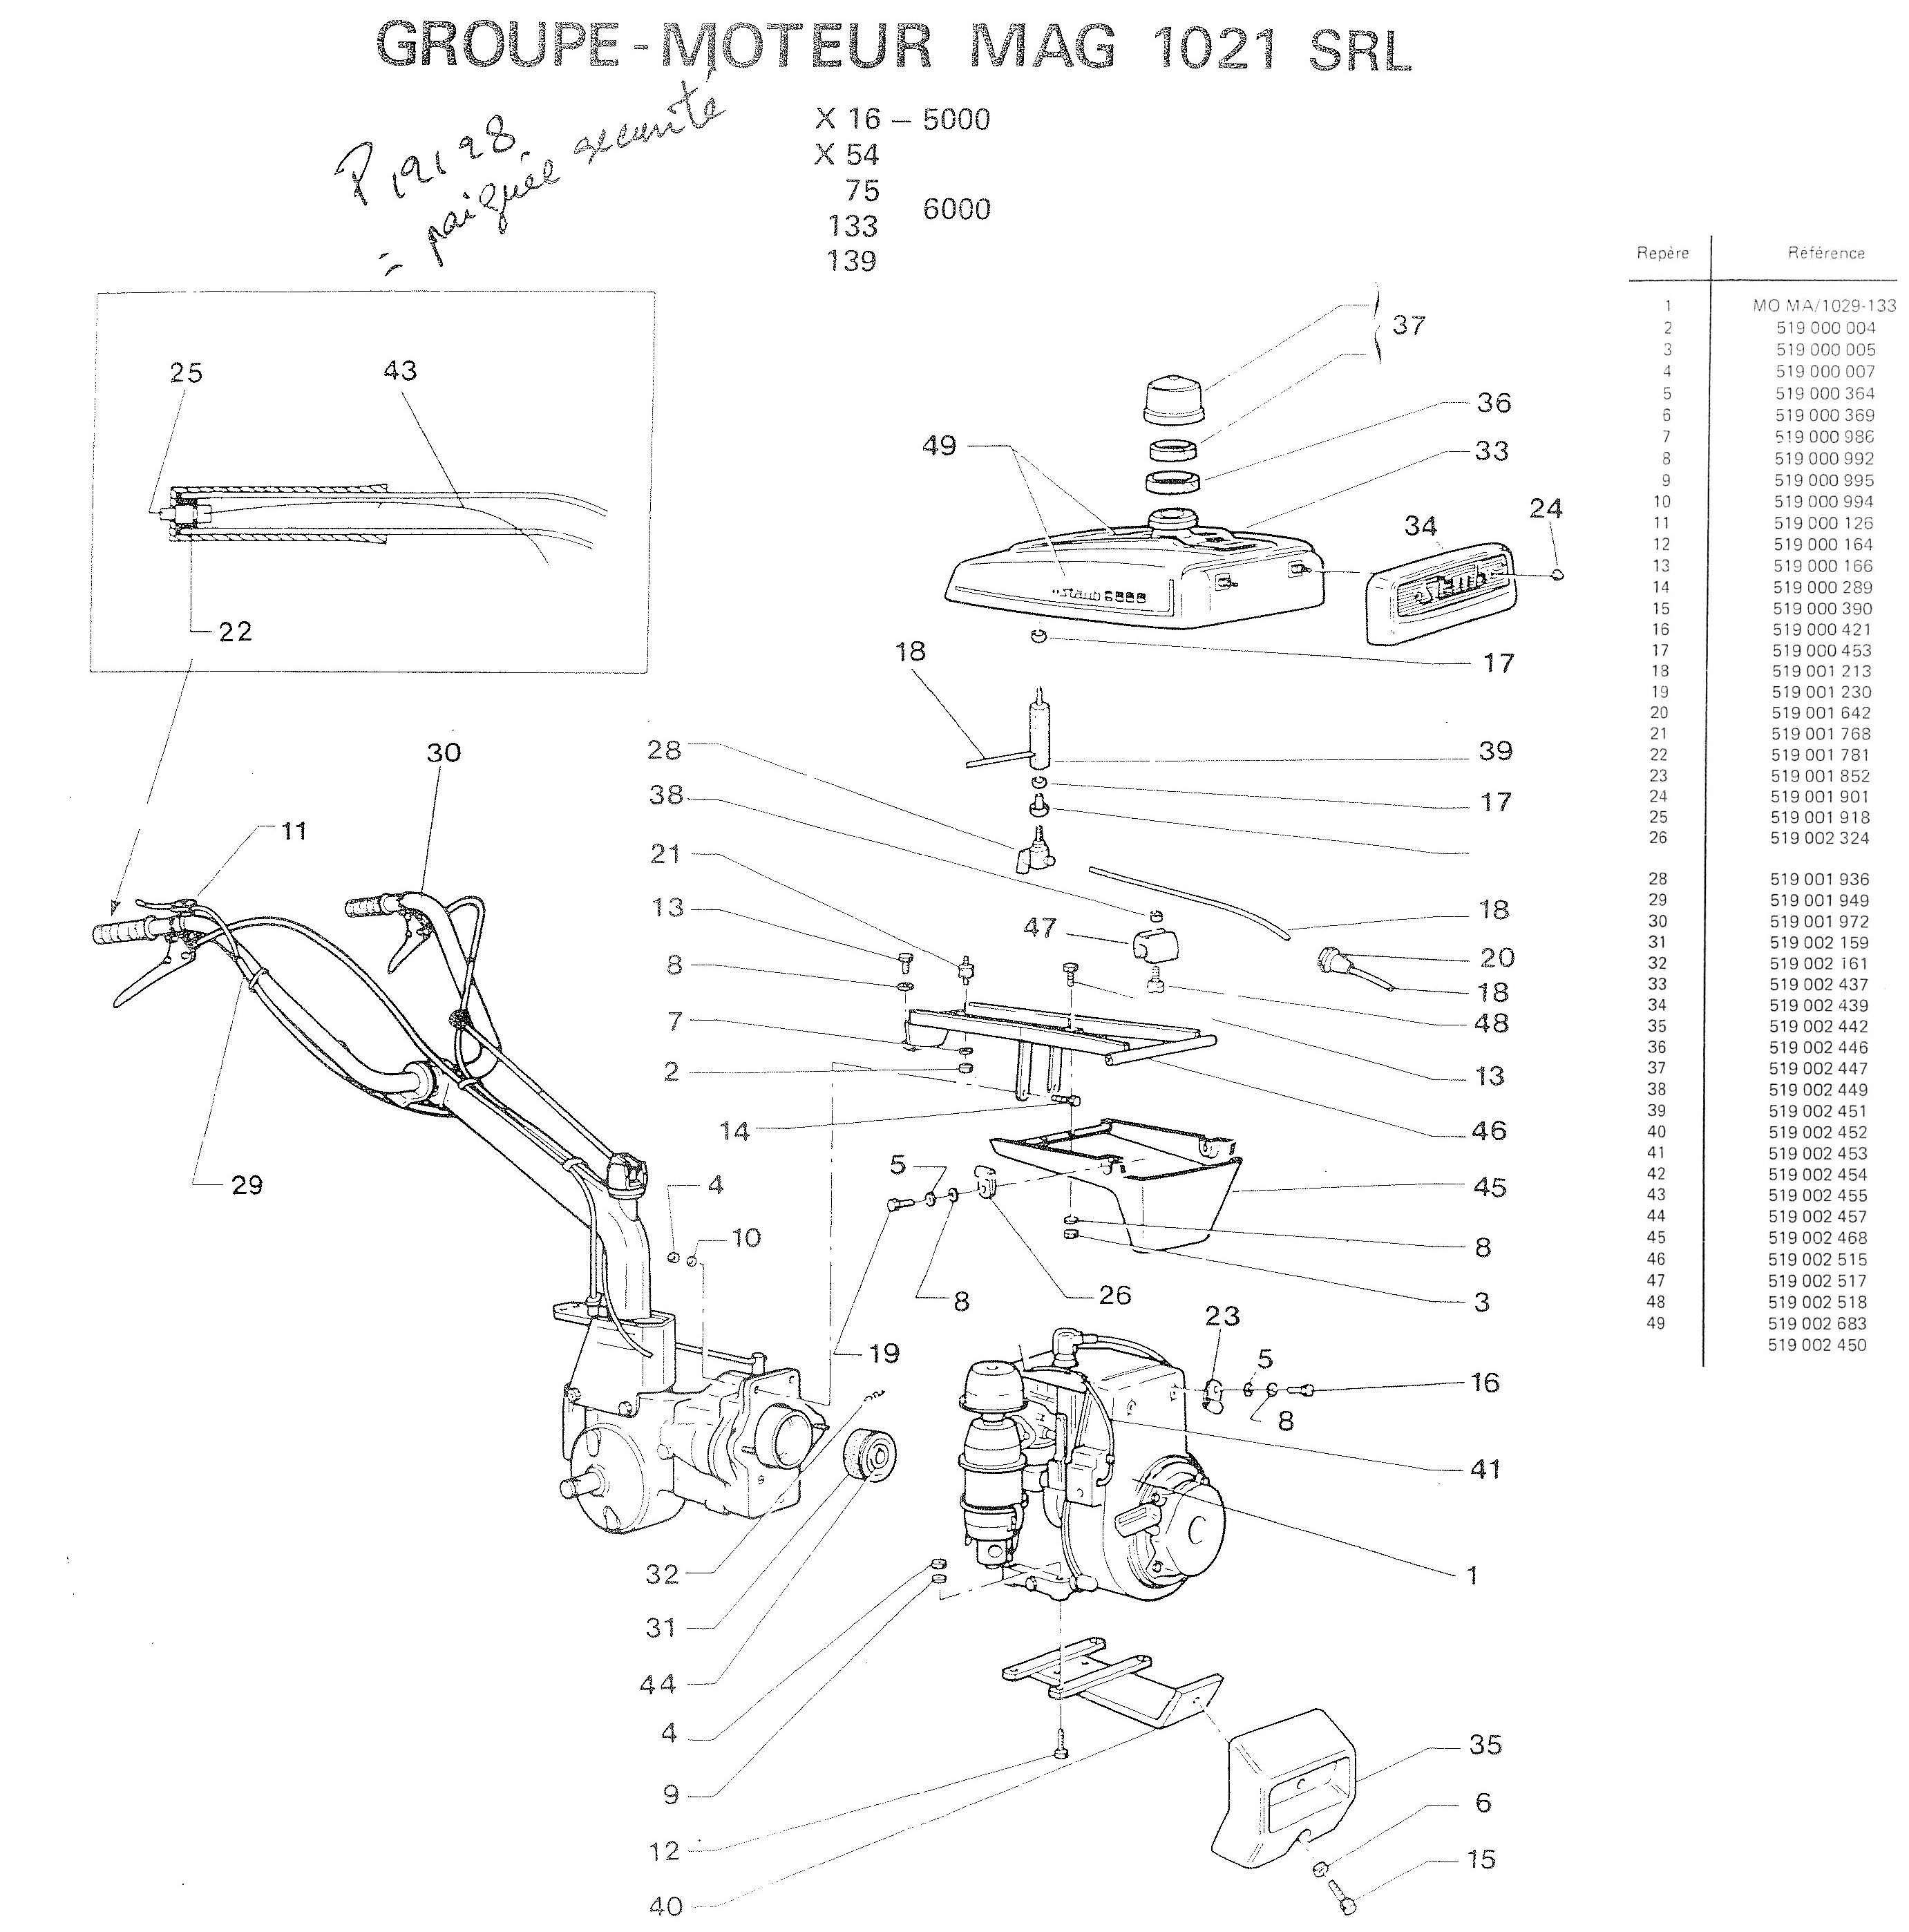 Groupe moteur MAG 1021